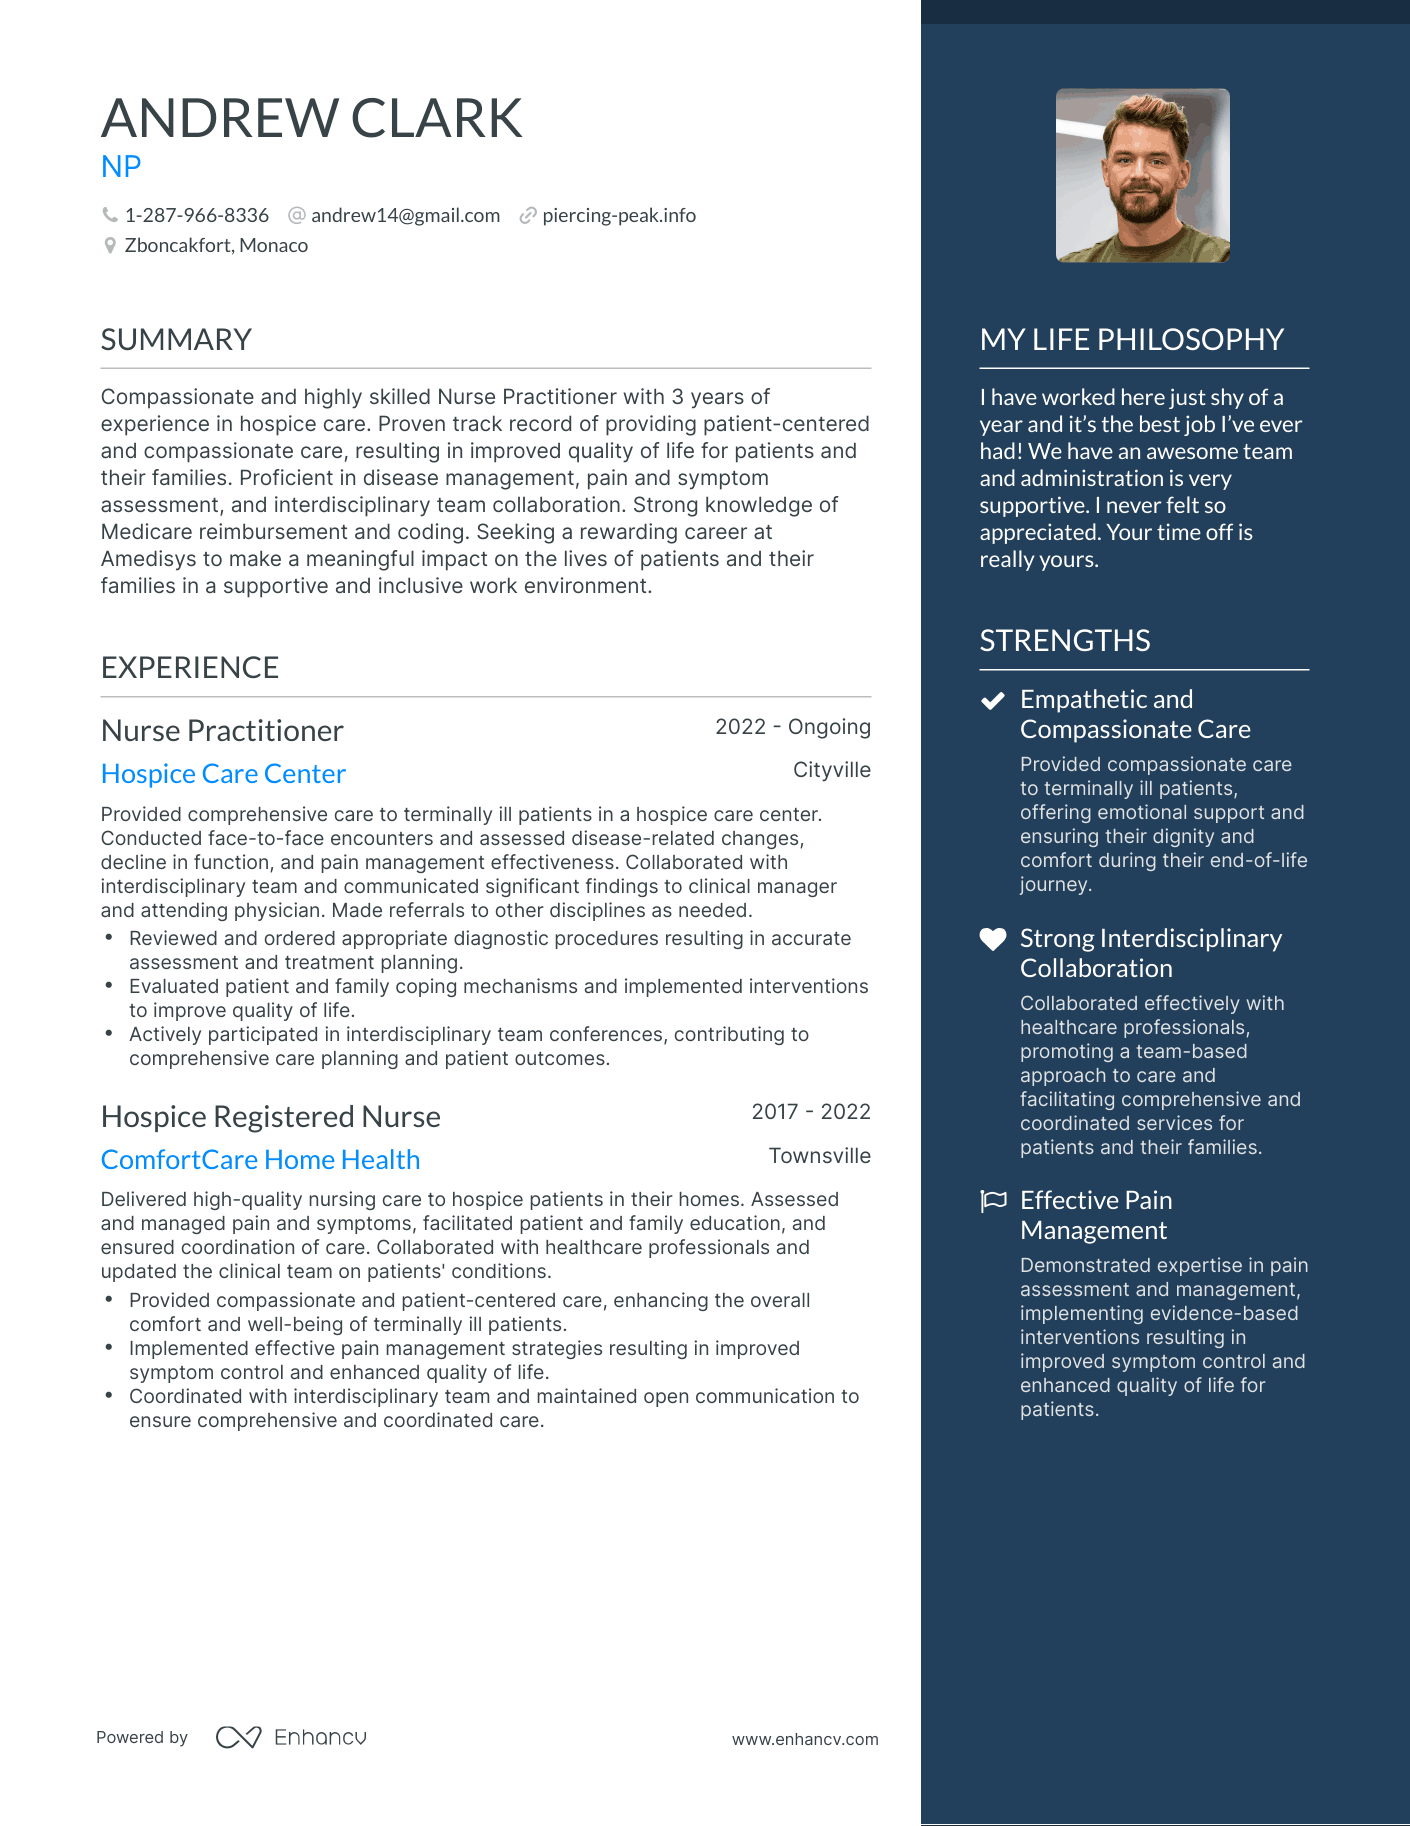 NP resume example